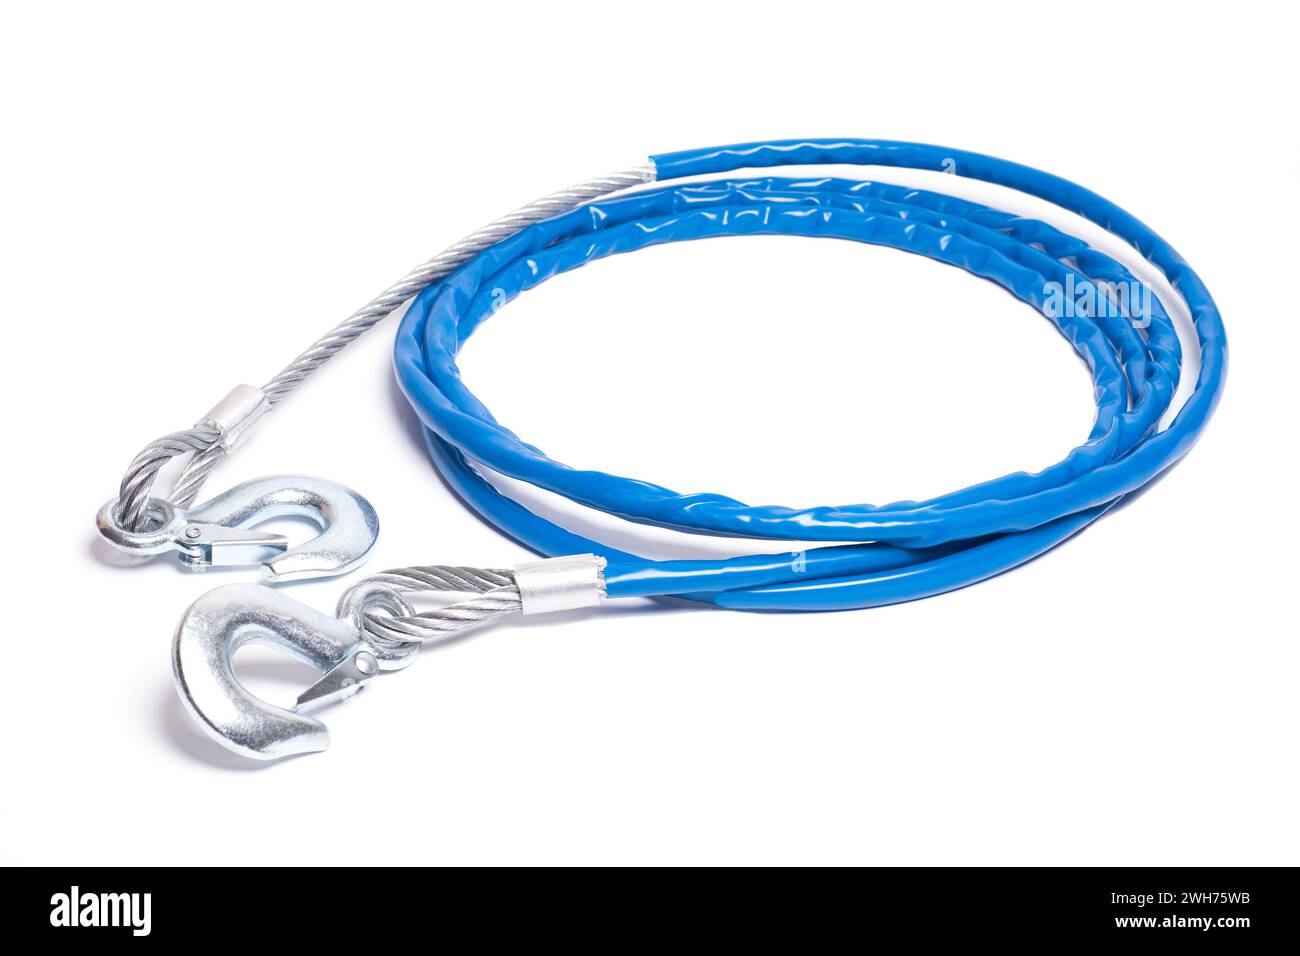 steel car tow rope with hooks in blue braid isolated on white background. Stock Photo